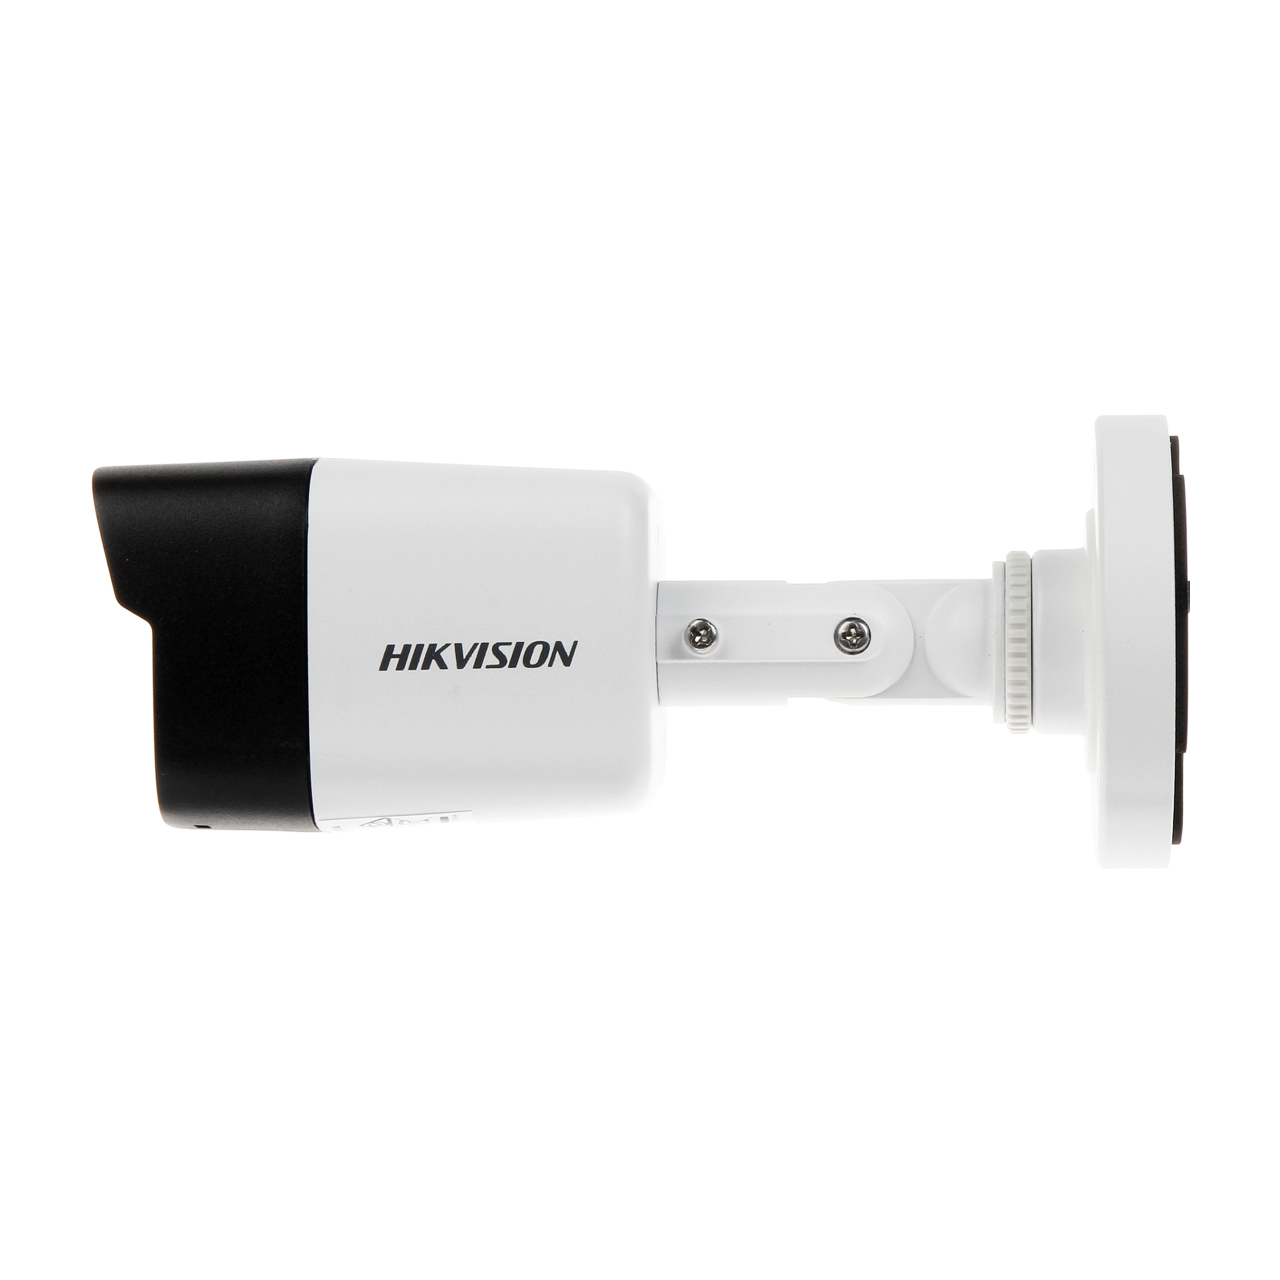 HIKVISION 3MP Turbo HD EXIR Bullet Camera DS-2CE16F1T-IT